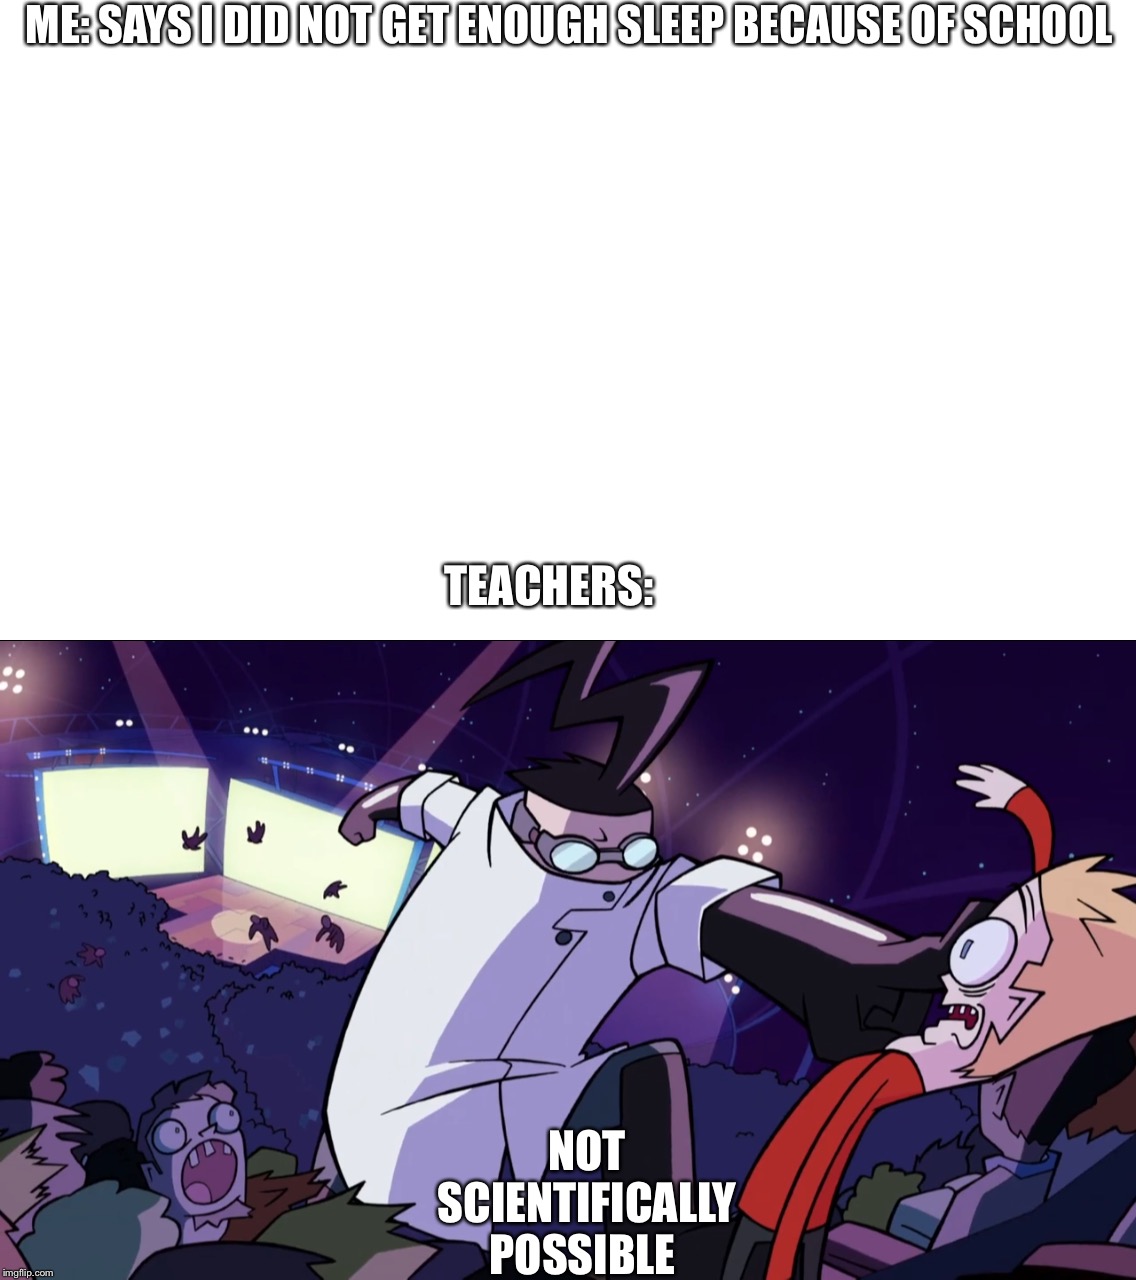 Teacher be like | ME: SAYS I DID NOT GET ENOUGH SLEEP BECAUSE OF SCHOOL; NOT SCIENTIFICALLY POSSIBLE; TEACHERS: | image tagged in invader zim,unhelpful high school teacher,teacher,invaderzim,invader zim enter the flourpus,memes | made w/ Imgflip meme maker